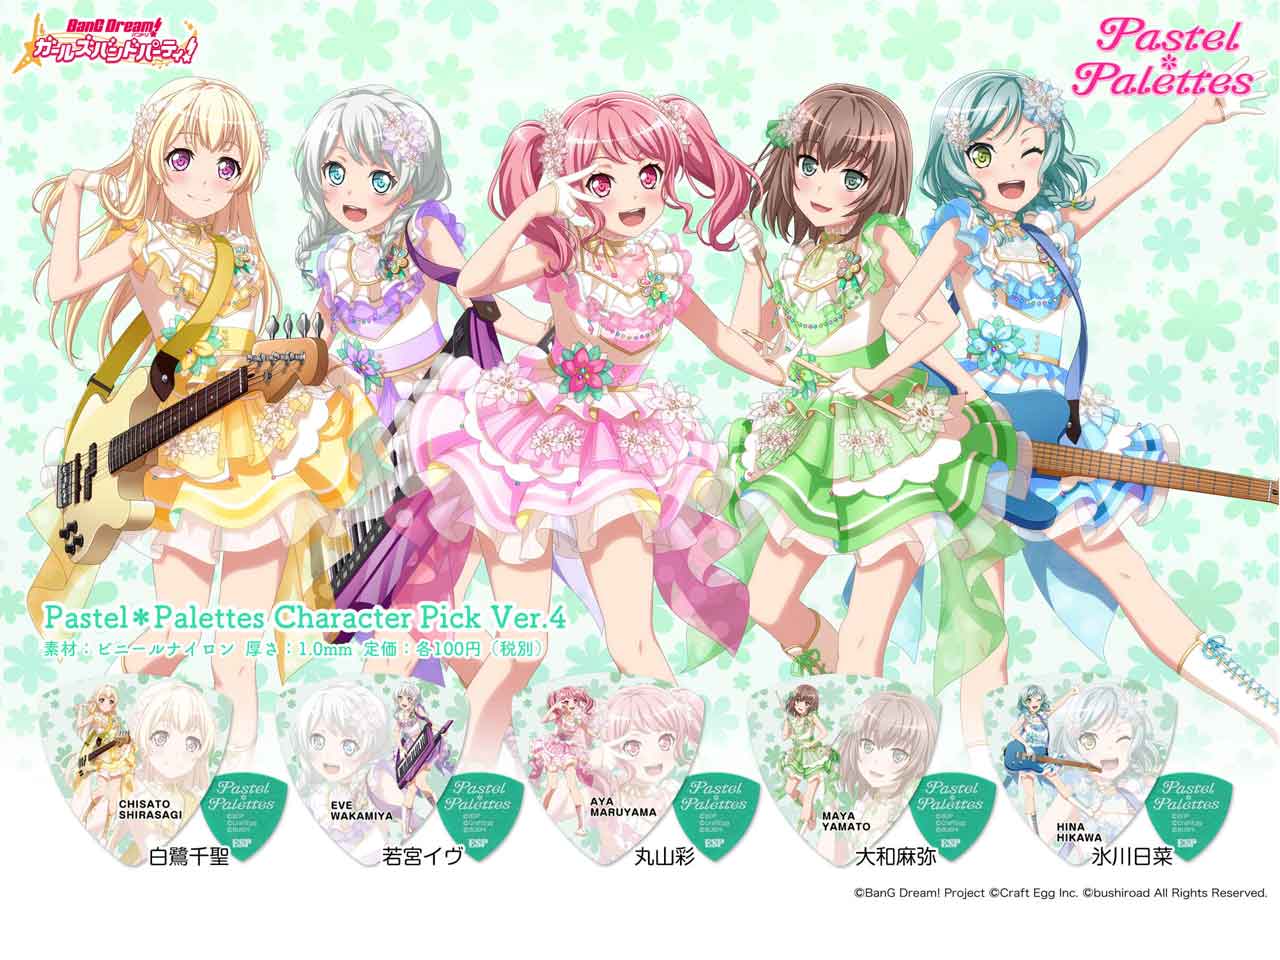 【ESP×BanG Dream!コラボピック】Pastel*Palettes Character Pick Ver.4 "白鷺千聖"（GBP CHISATO PASTEL PALETTES 4）＆”ハメパチ” セット